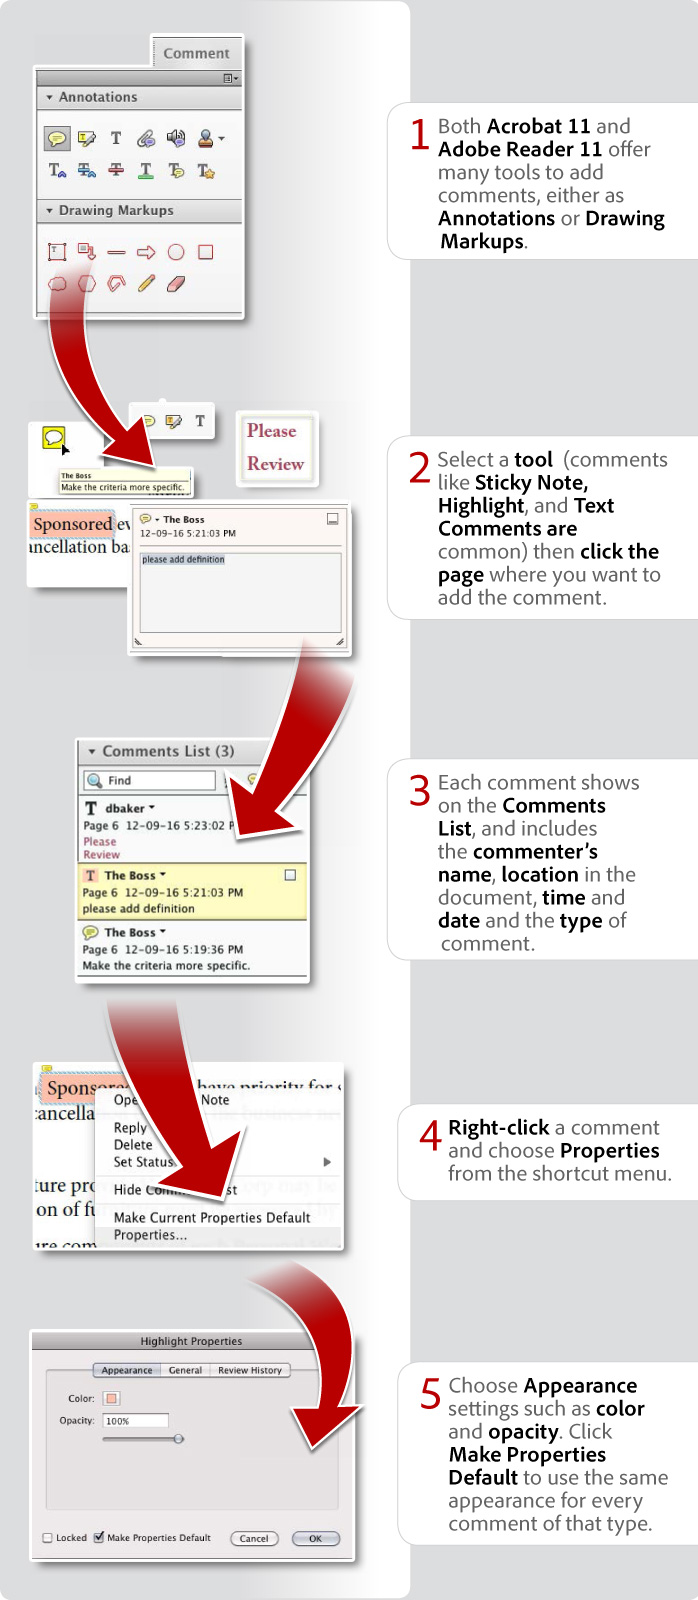 How to work with comment tools in Acrobat XI